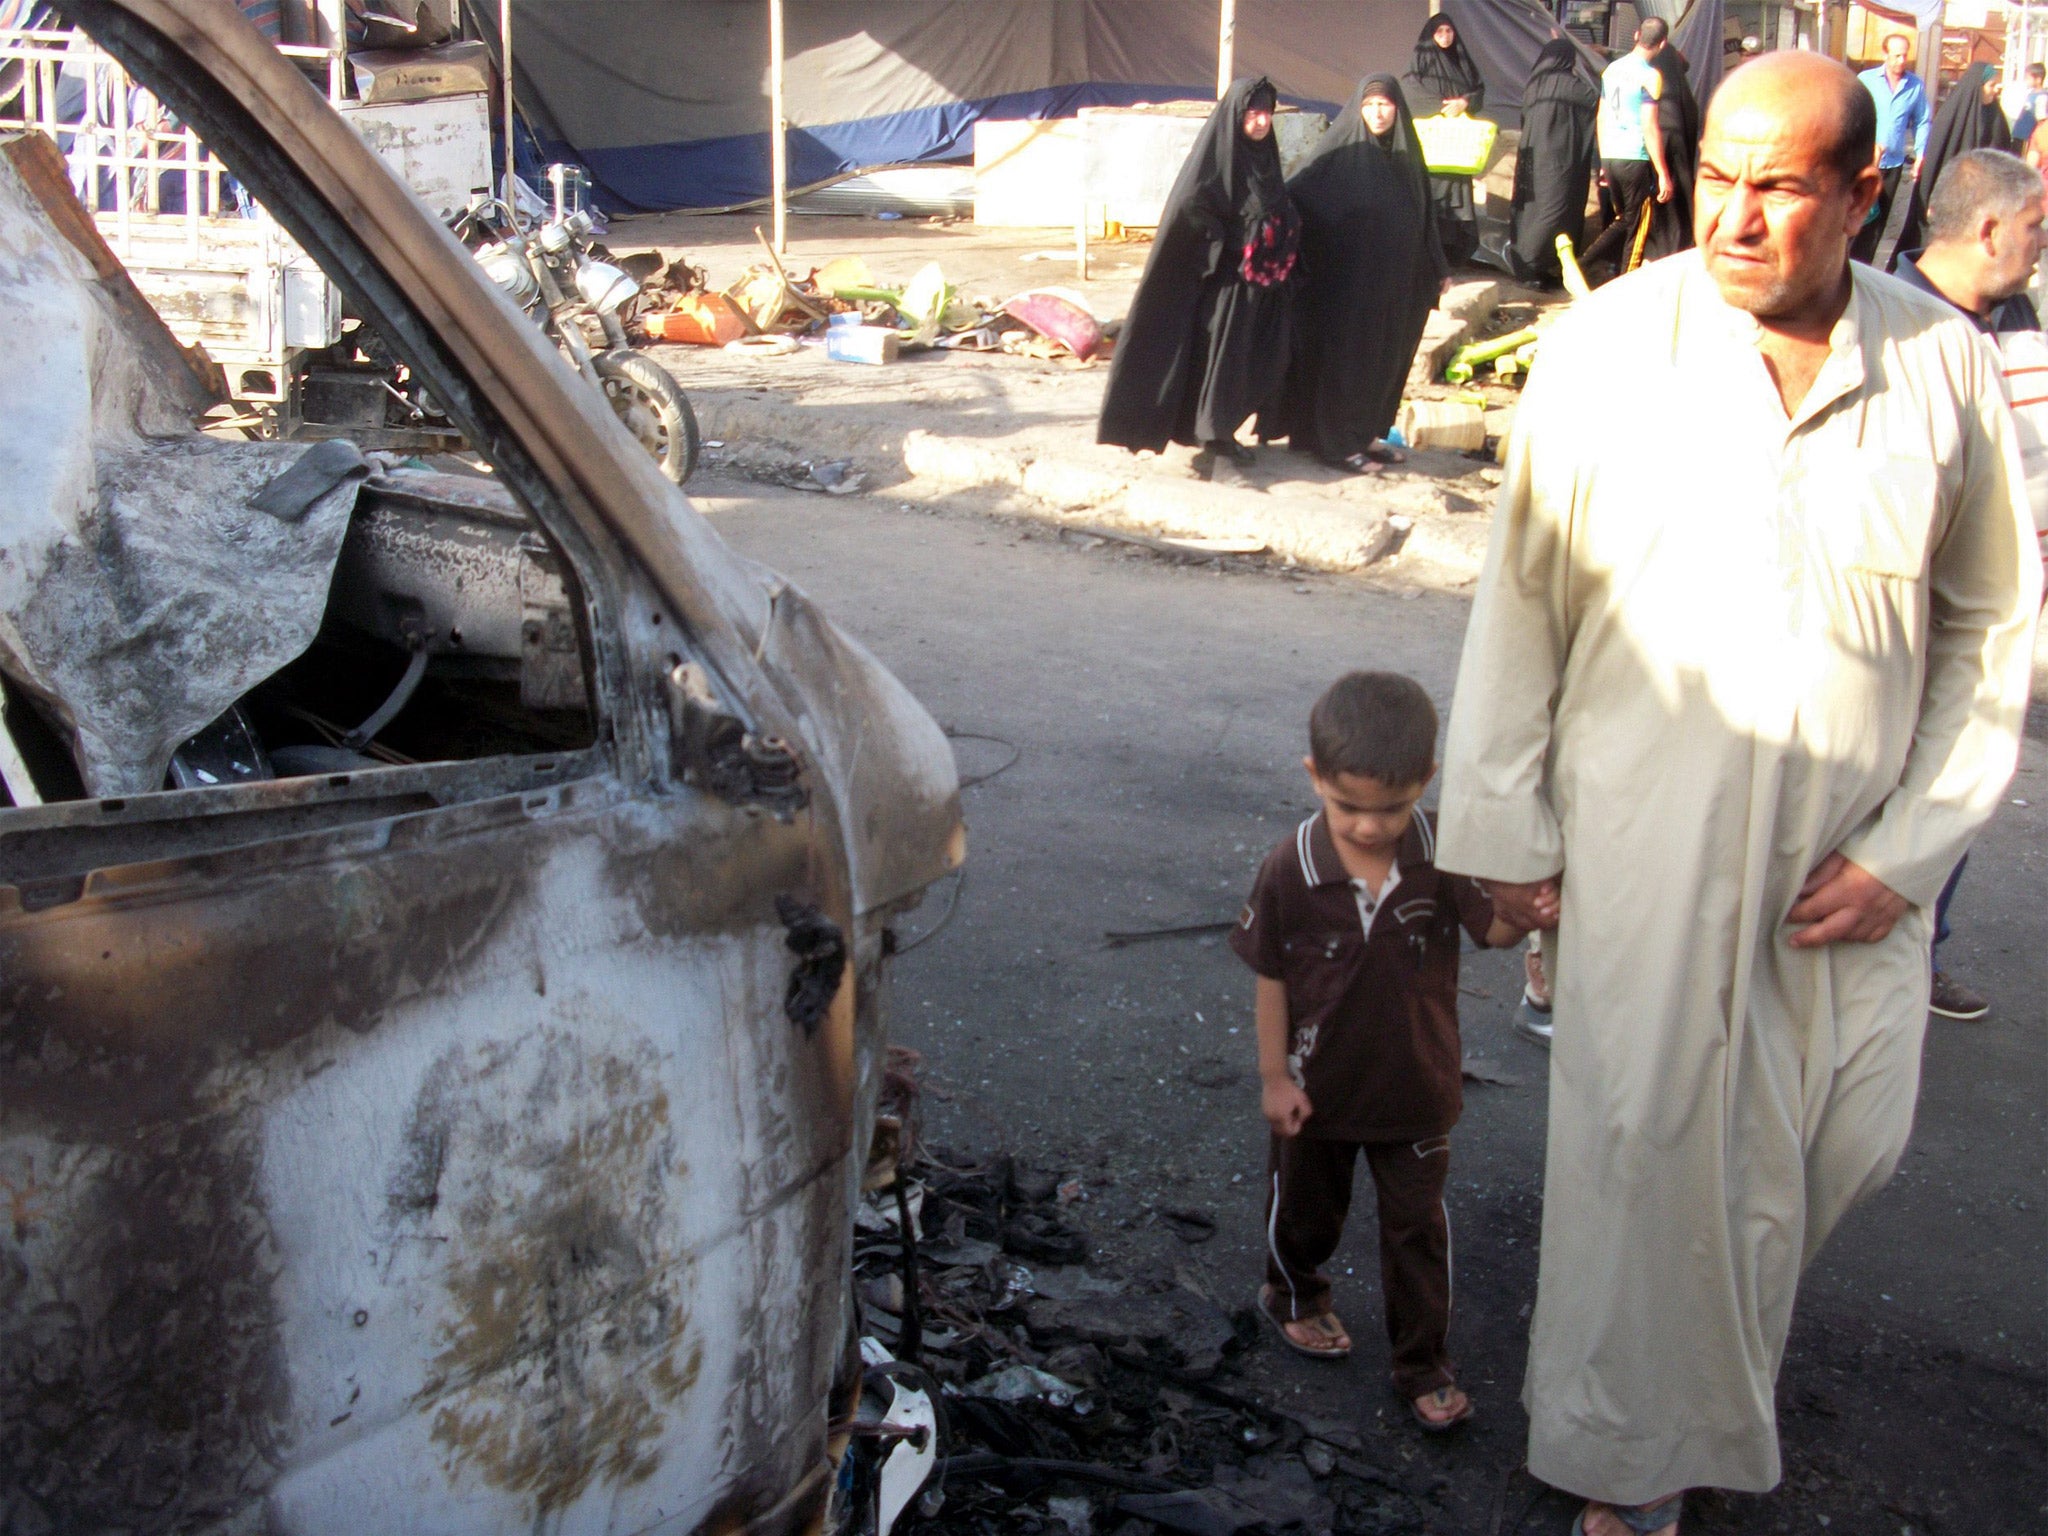 An Iraqi man with a boy inspects the scene of a car bomb attack in Sadr city